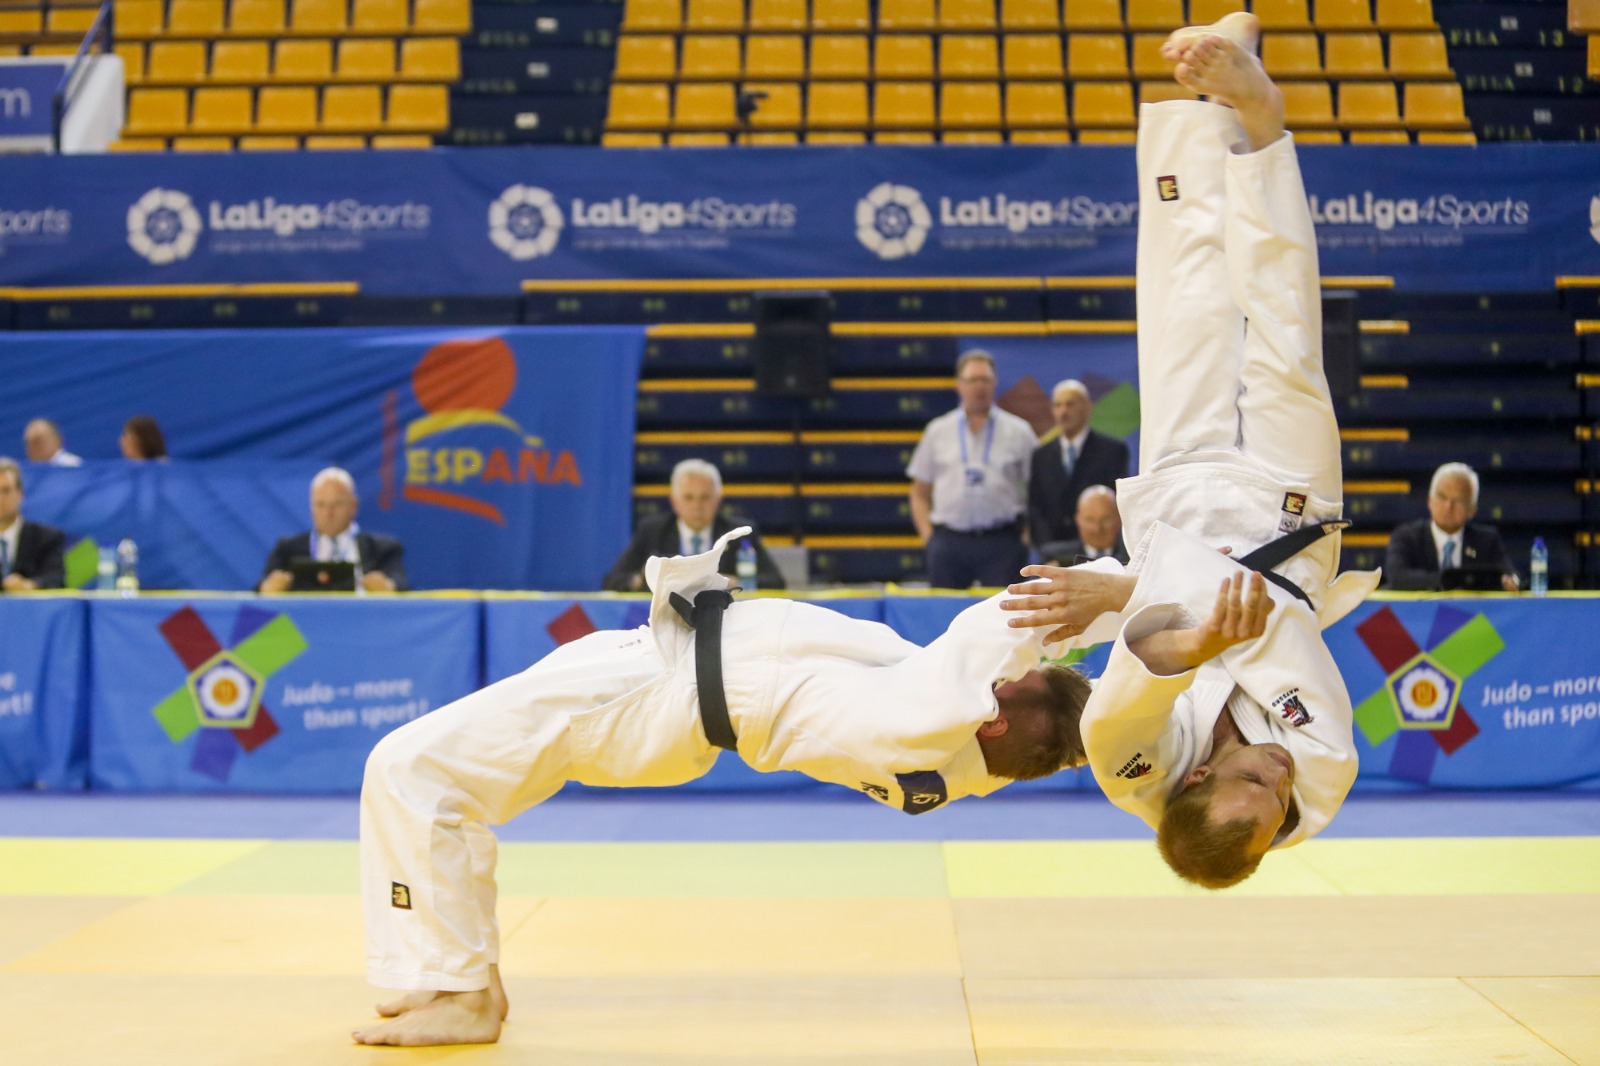 UNEXPECTED ENTRY SUCCESS FOR KATA